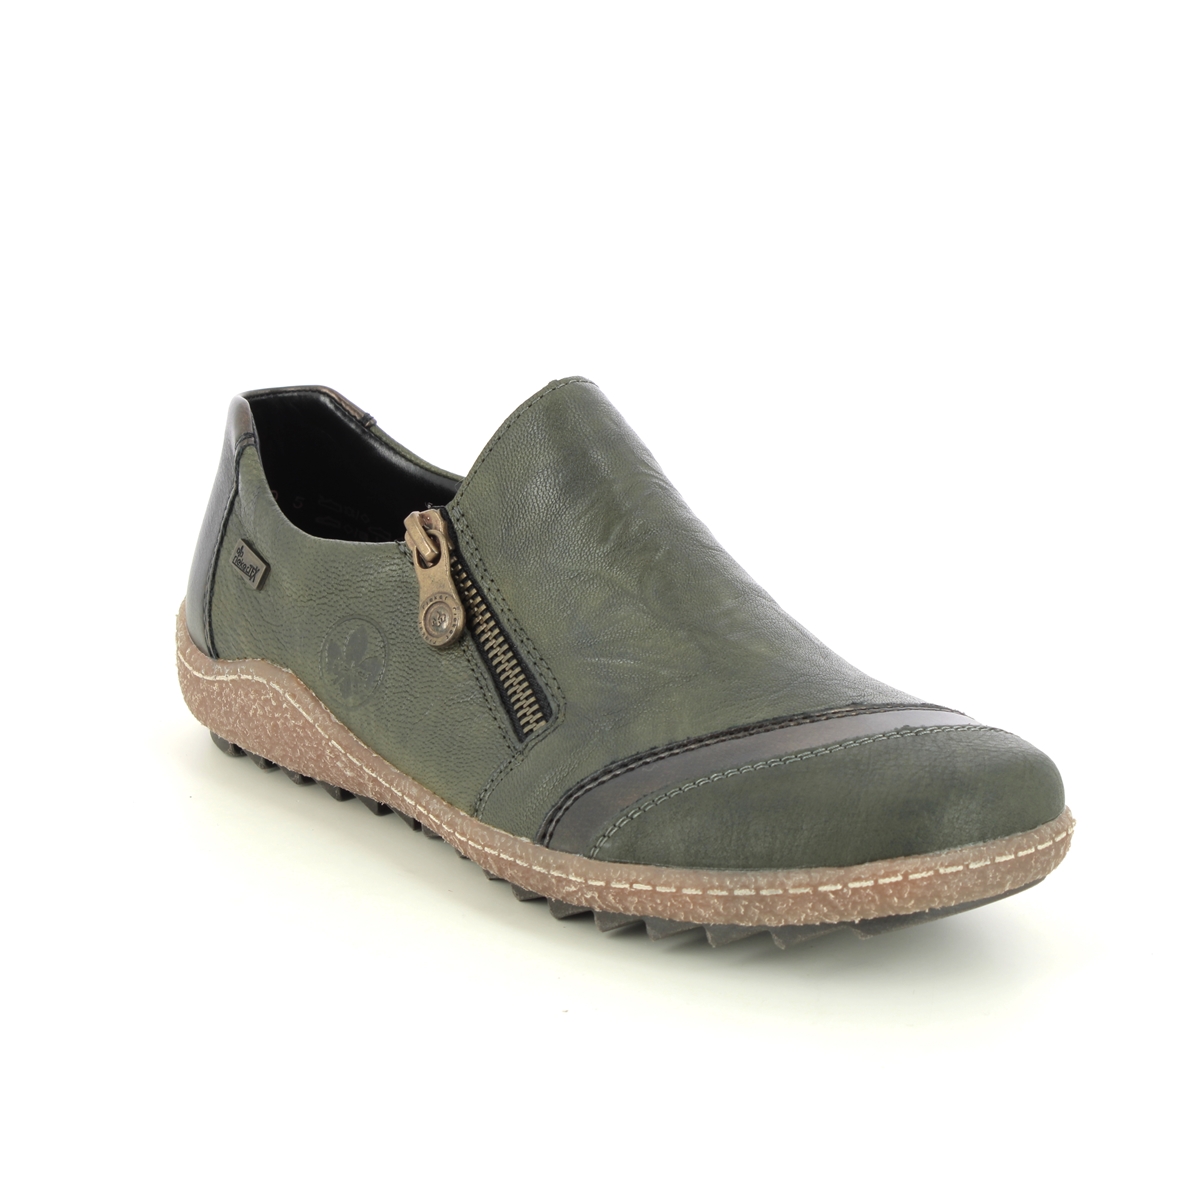 Rieker L7571-54 Olive leather Womens Comfort Slip On Shoes in a Plain Leather in Size 41